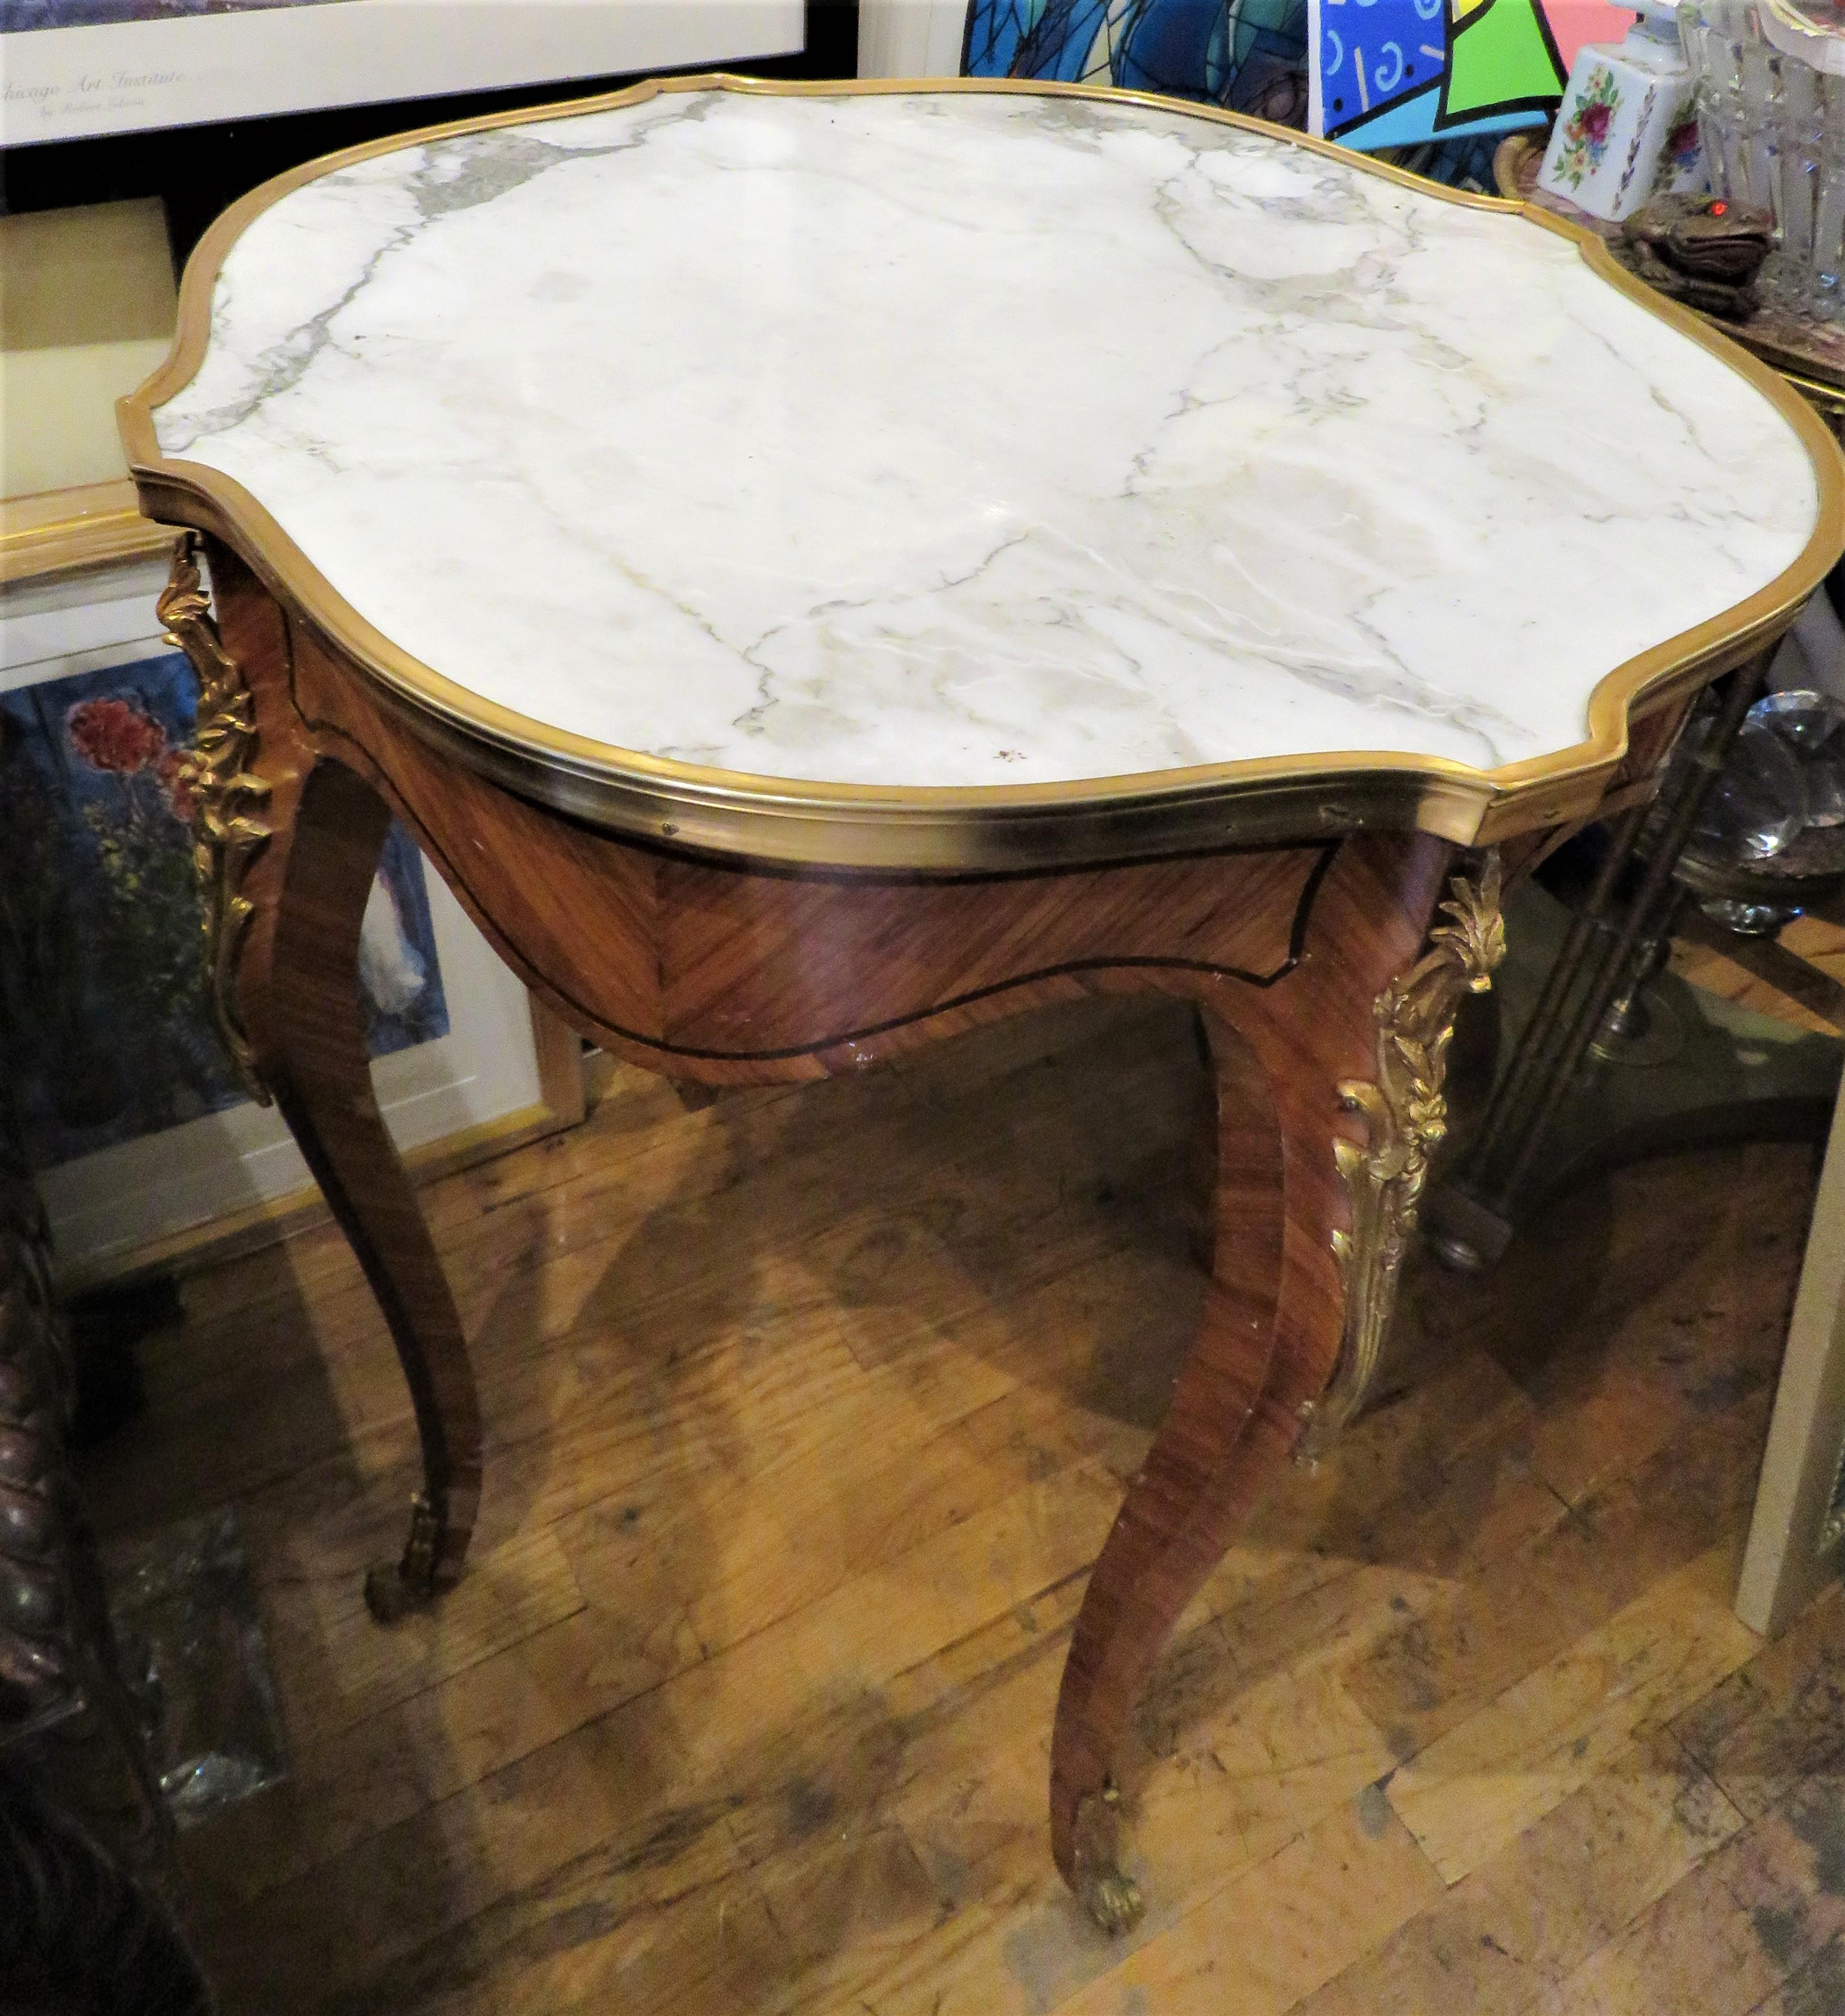 The Following Item we are Offering is a Rare Outstanding 19th Century Museum Quality French Mahogony Marble and Bronze Table. Table is done with Outstanding Scrolled Bronze Detail. Structurally sound and in good condition. Minor areas of wear that